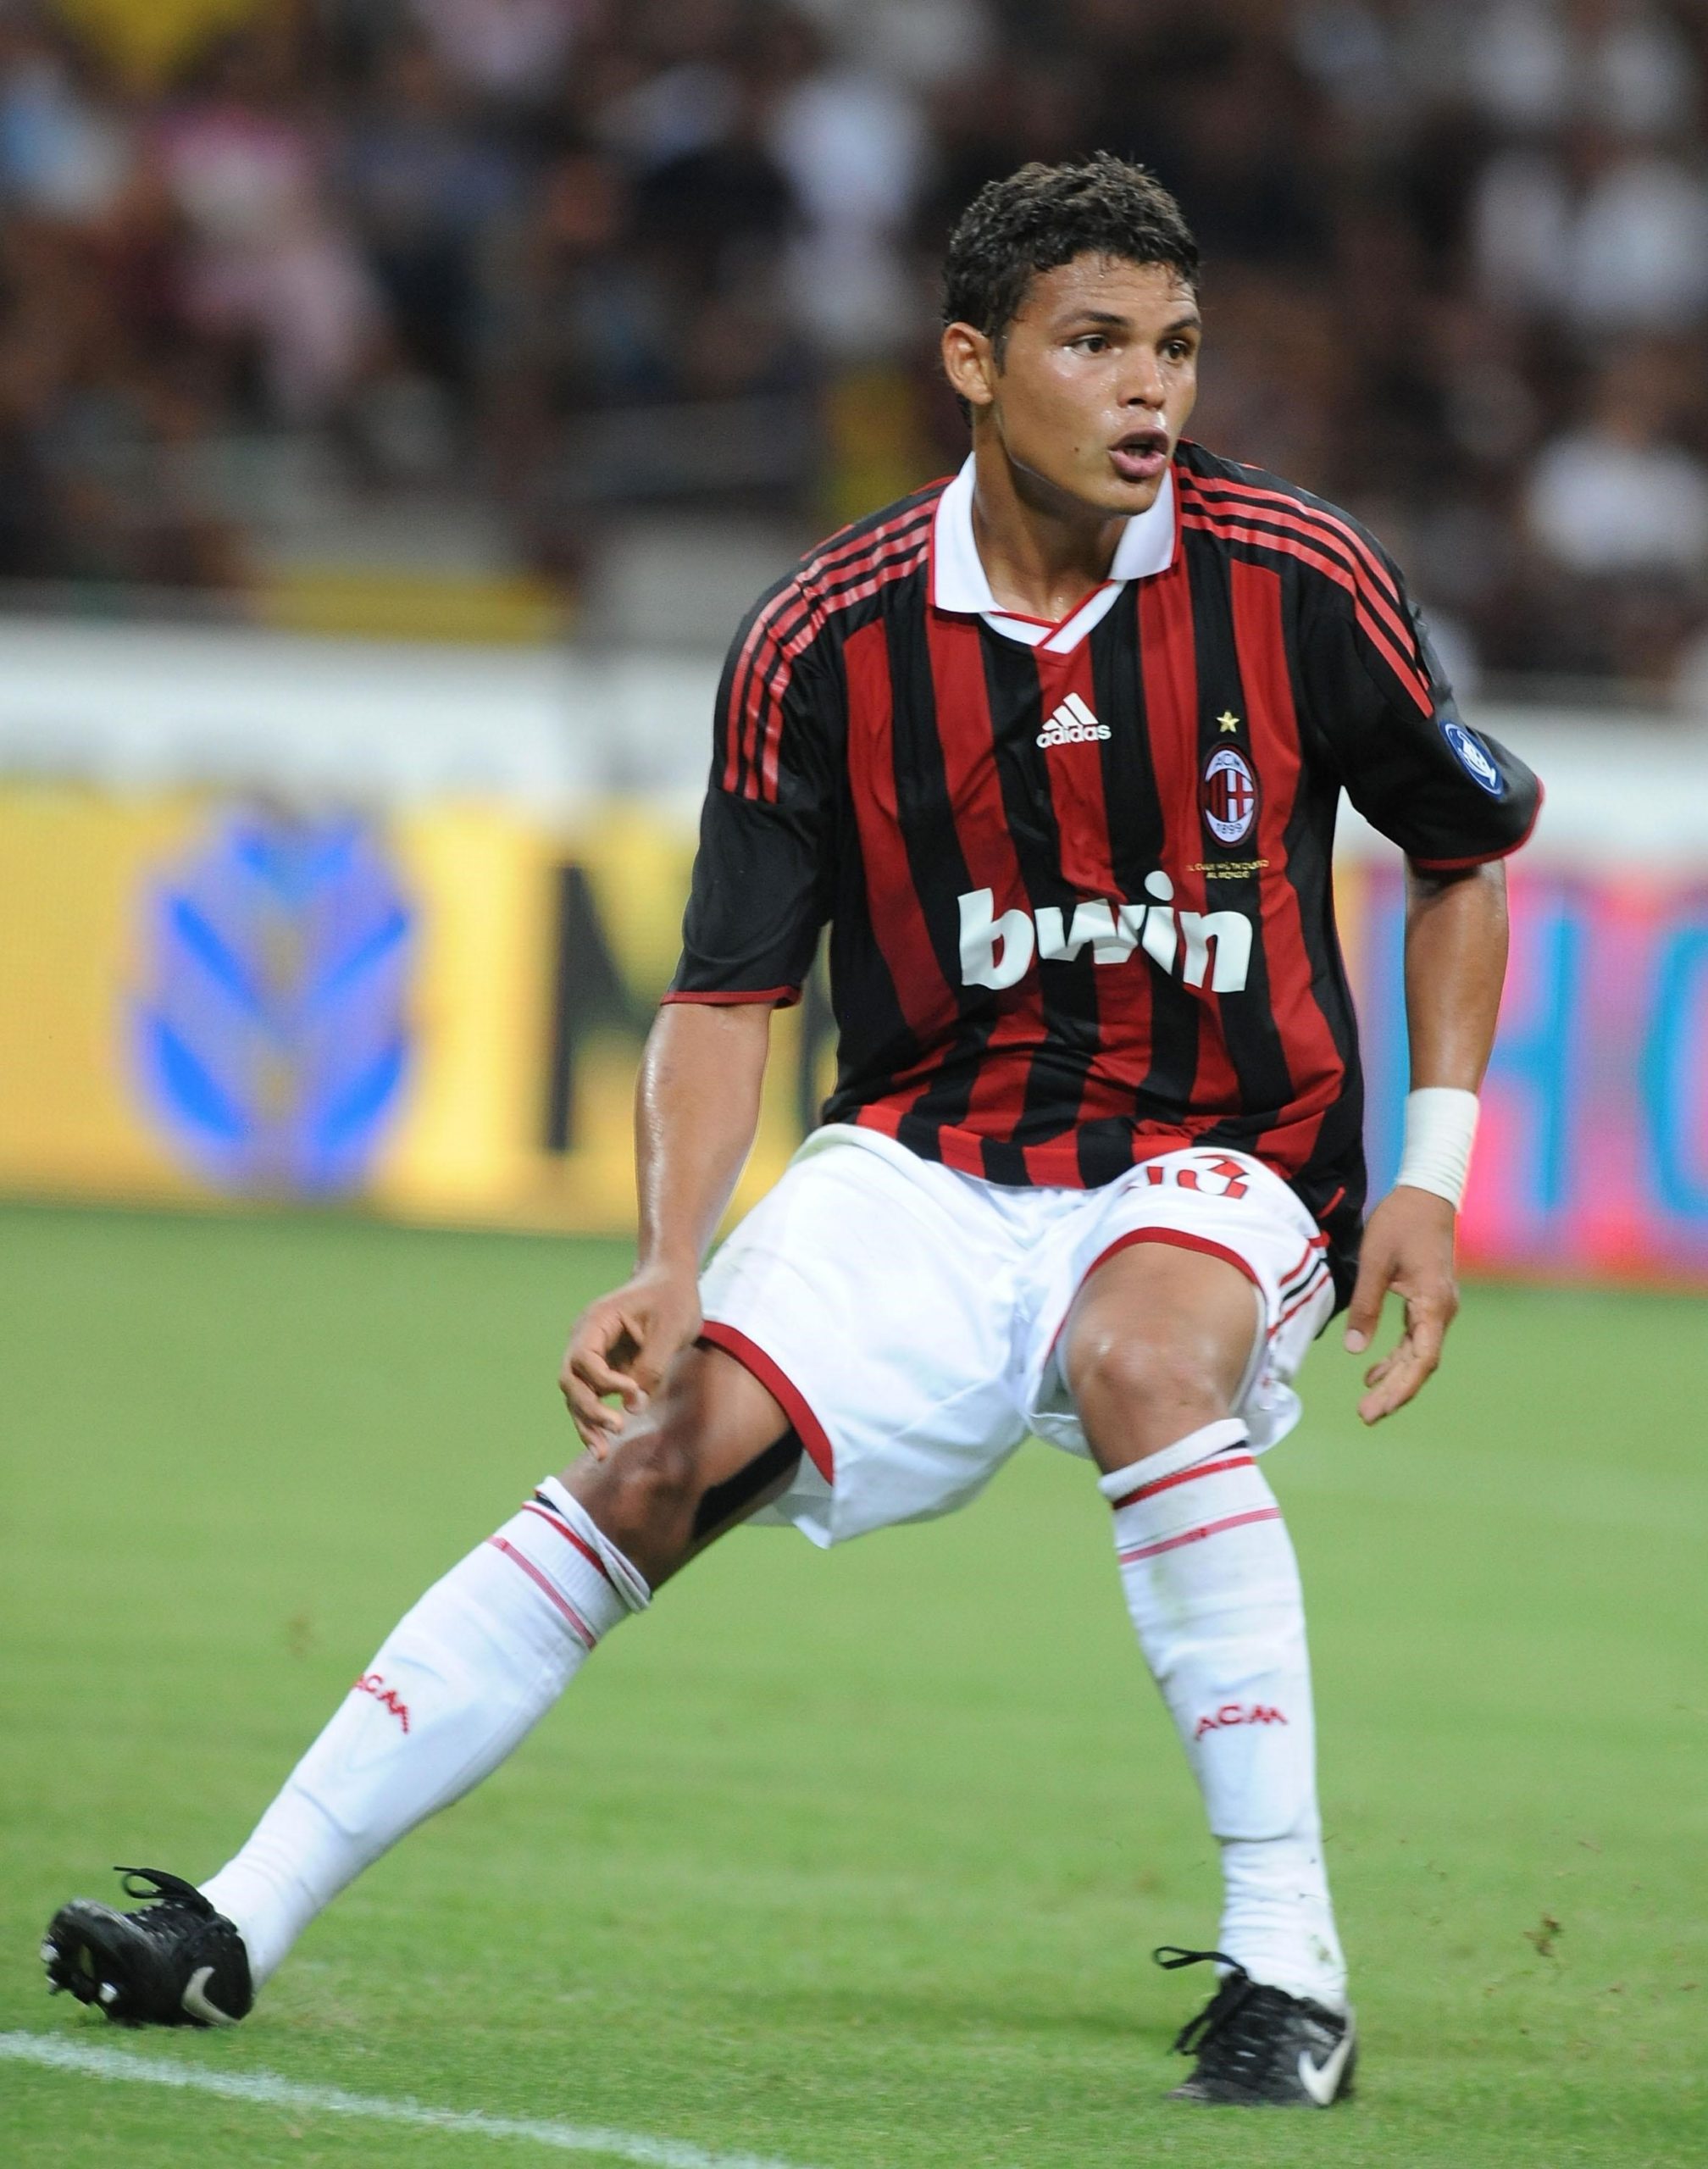 11 Facts About Thiago Silva - Family, NetWorth, Lifestyle, Childhood